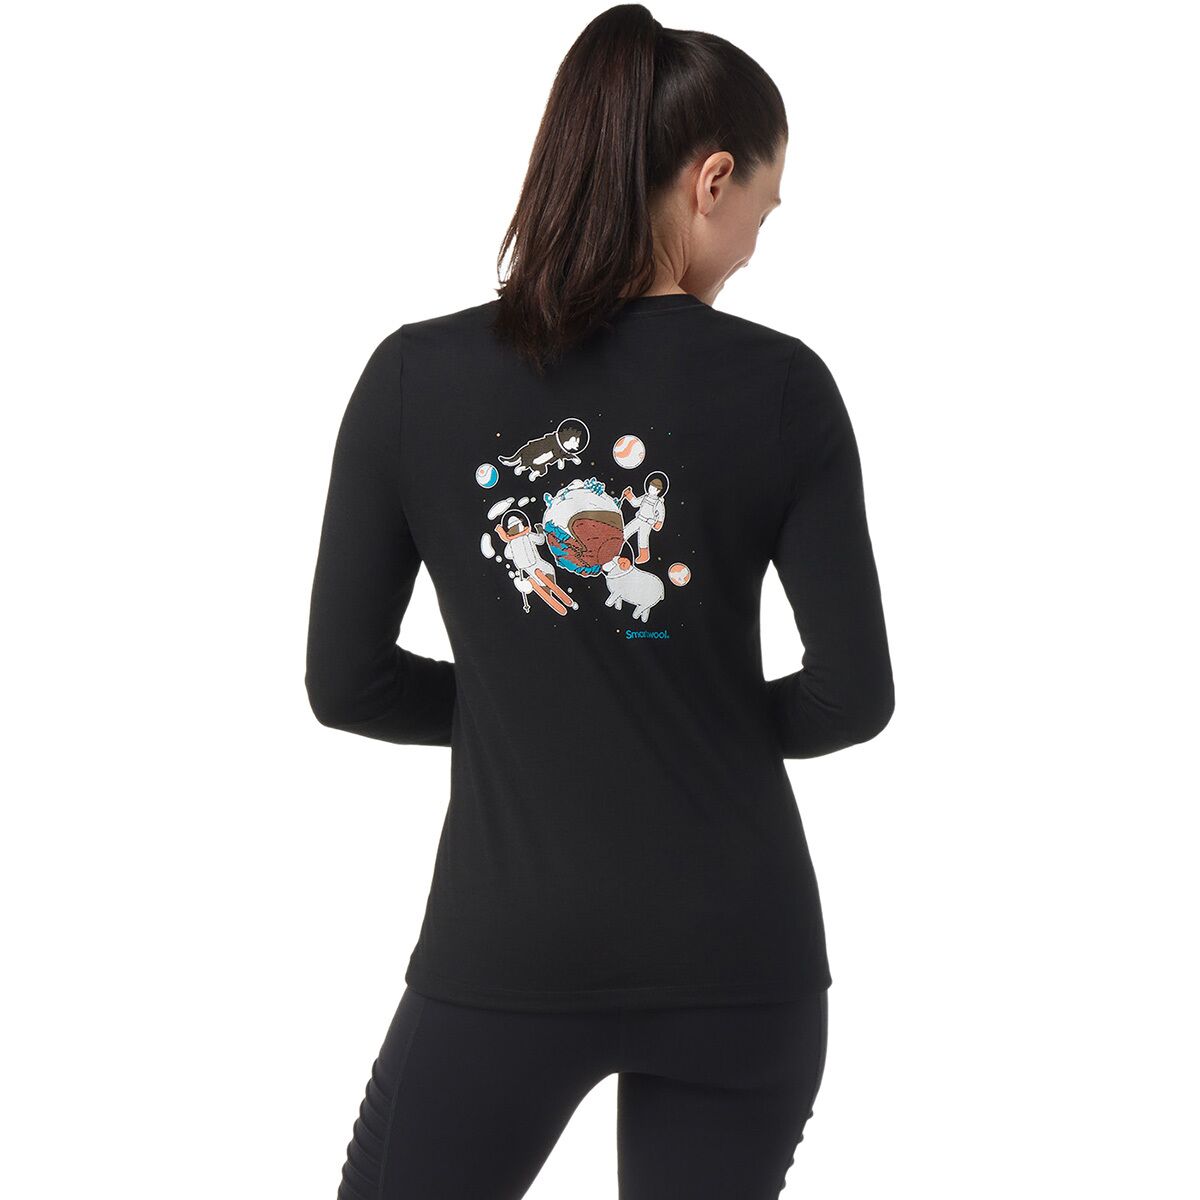 Smartwool One Small Step For Sheep LS Graphic T-Shirt - Women's